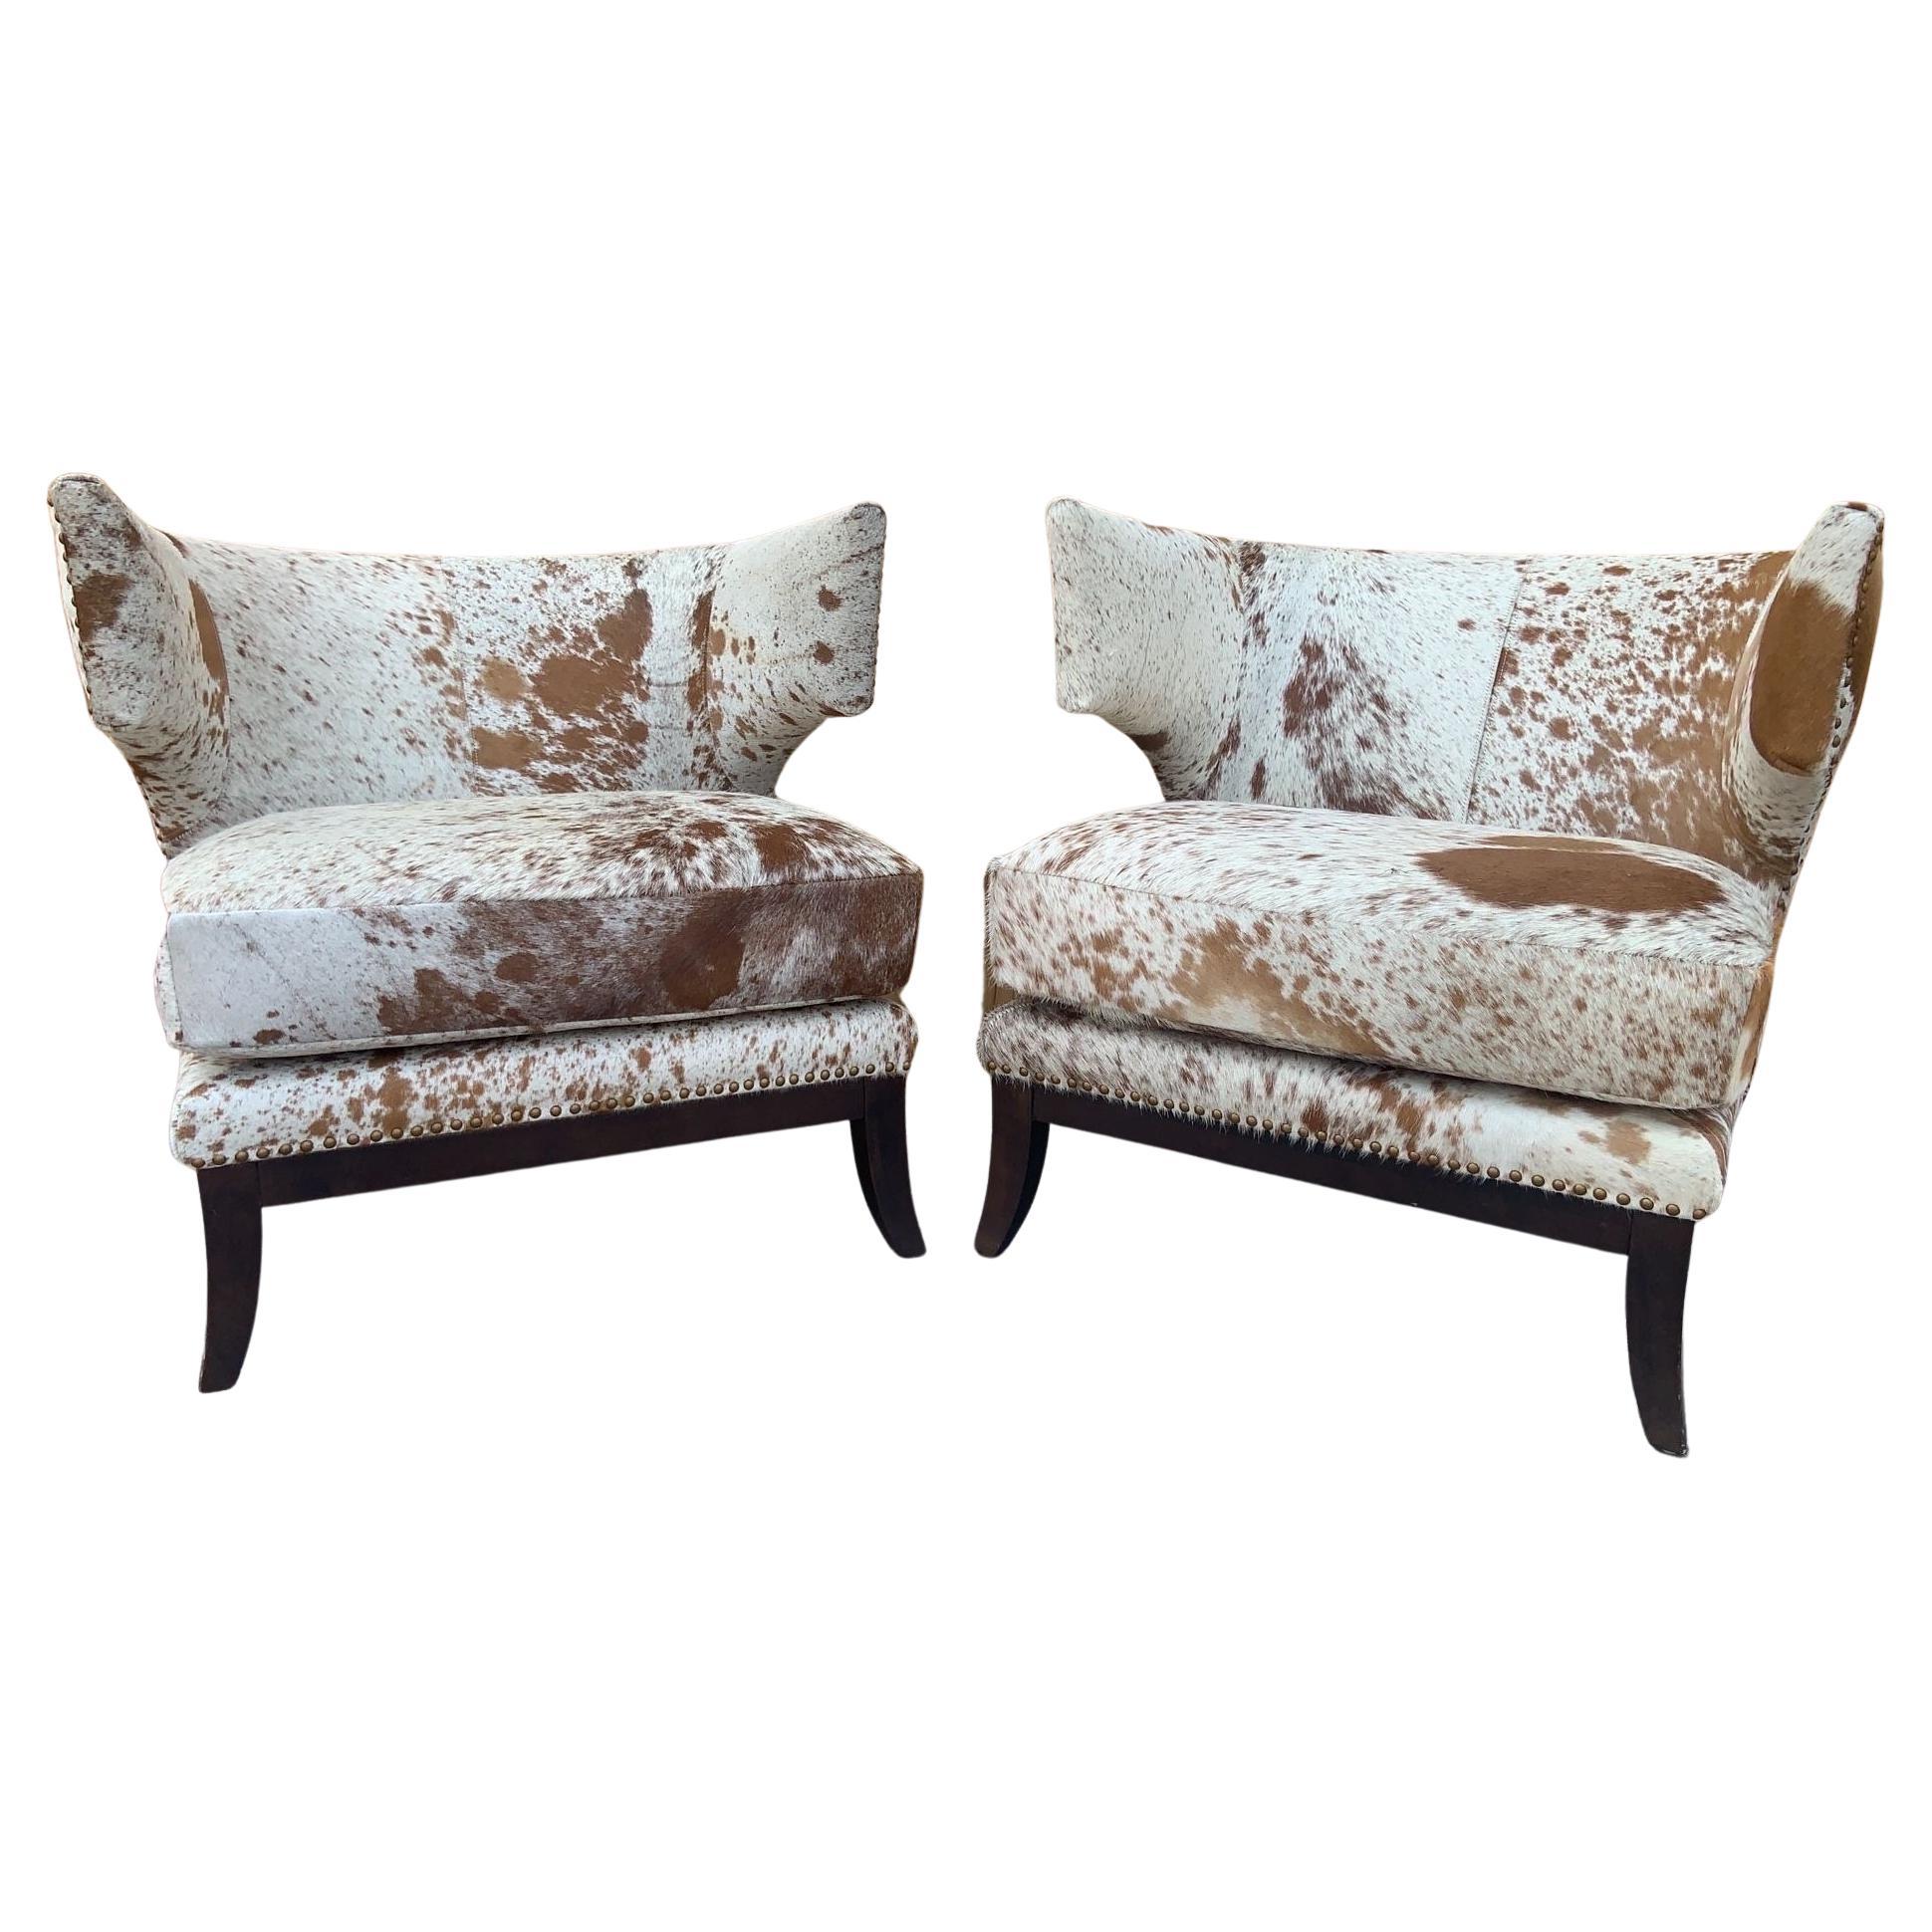 Vintage English Horseshoe Back Savoy Chairs Newly Upholstered in White & Brown Brazilian Cowhide

Gorgeous Vintage Set of English Horseshoe Back which were Newly Upholstered in White with Peppered Brown Hair-on Brazilian Cowhide. The Savoy chairs